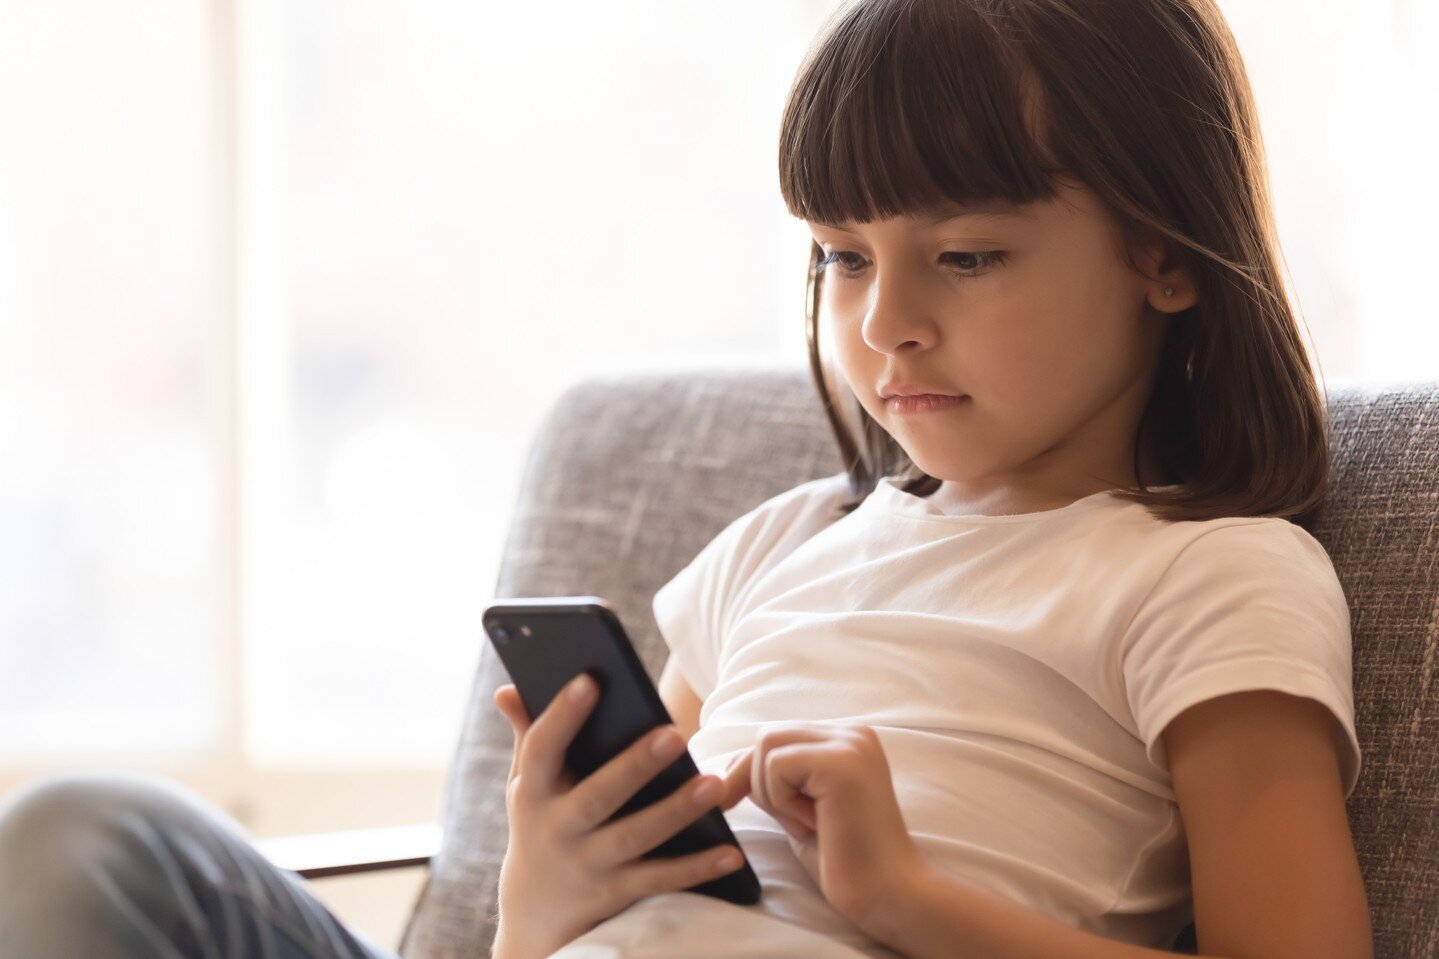 Navigating the challenges that digital technology presents is a real challenge as children grow older. Join this helpful webinar on Tuesday 19 July at 7pm for some useful guidance.

Register now https://loom.ly/mSKH6uY